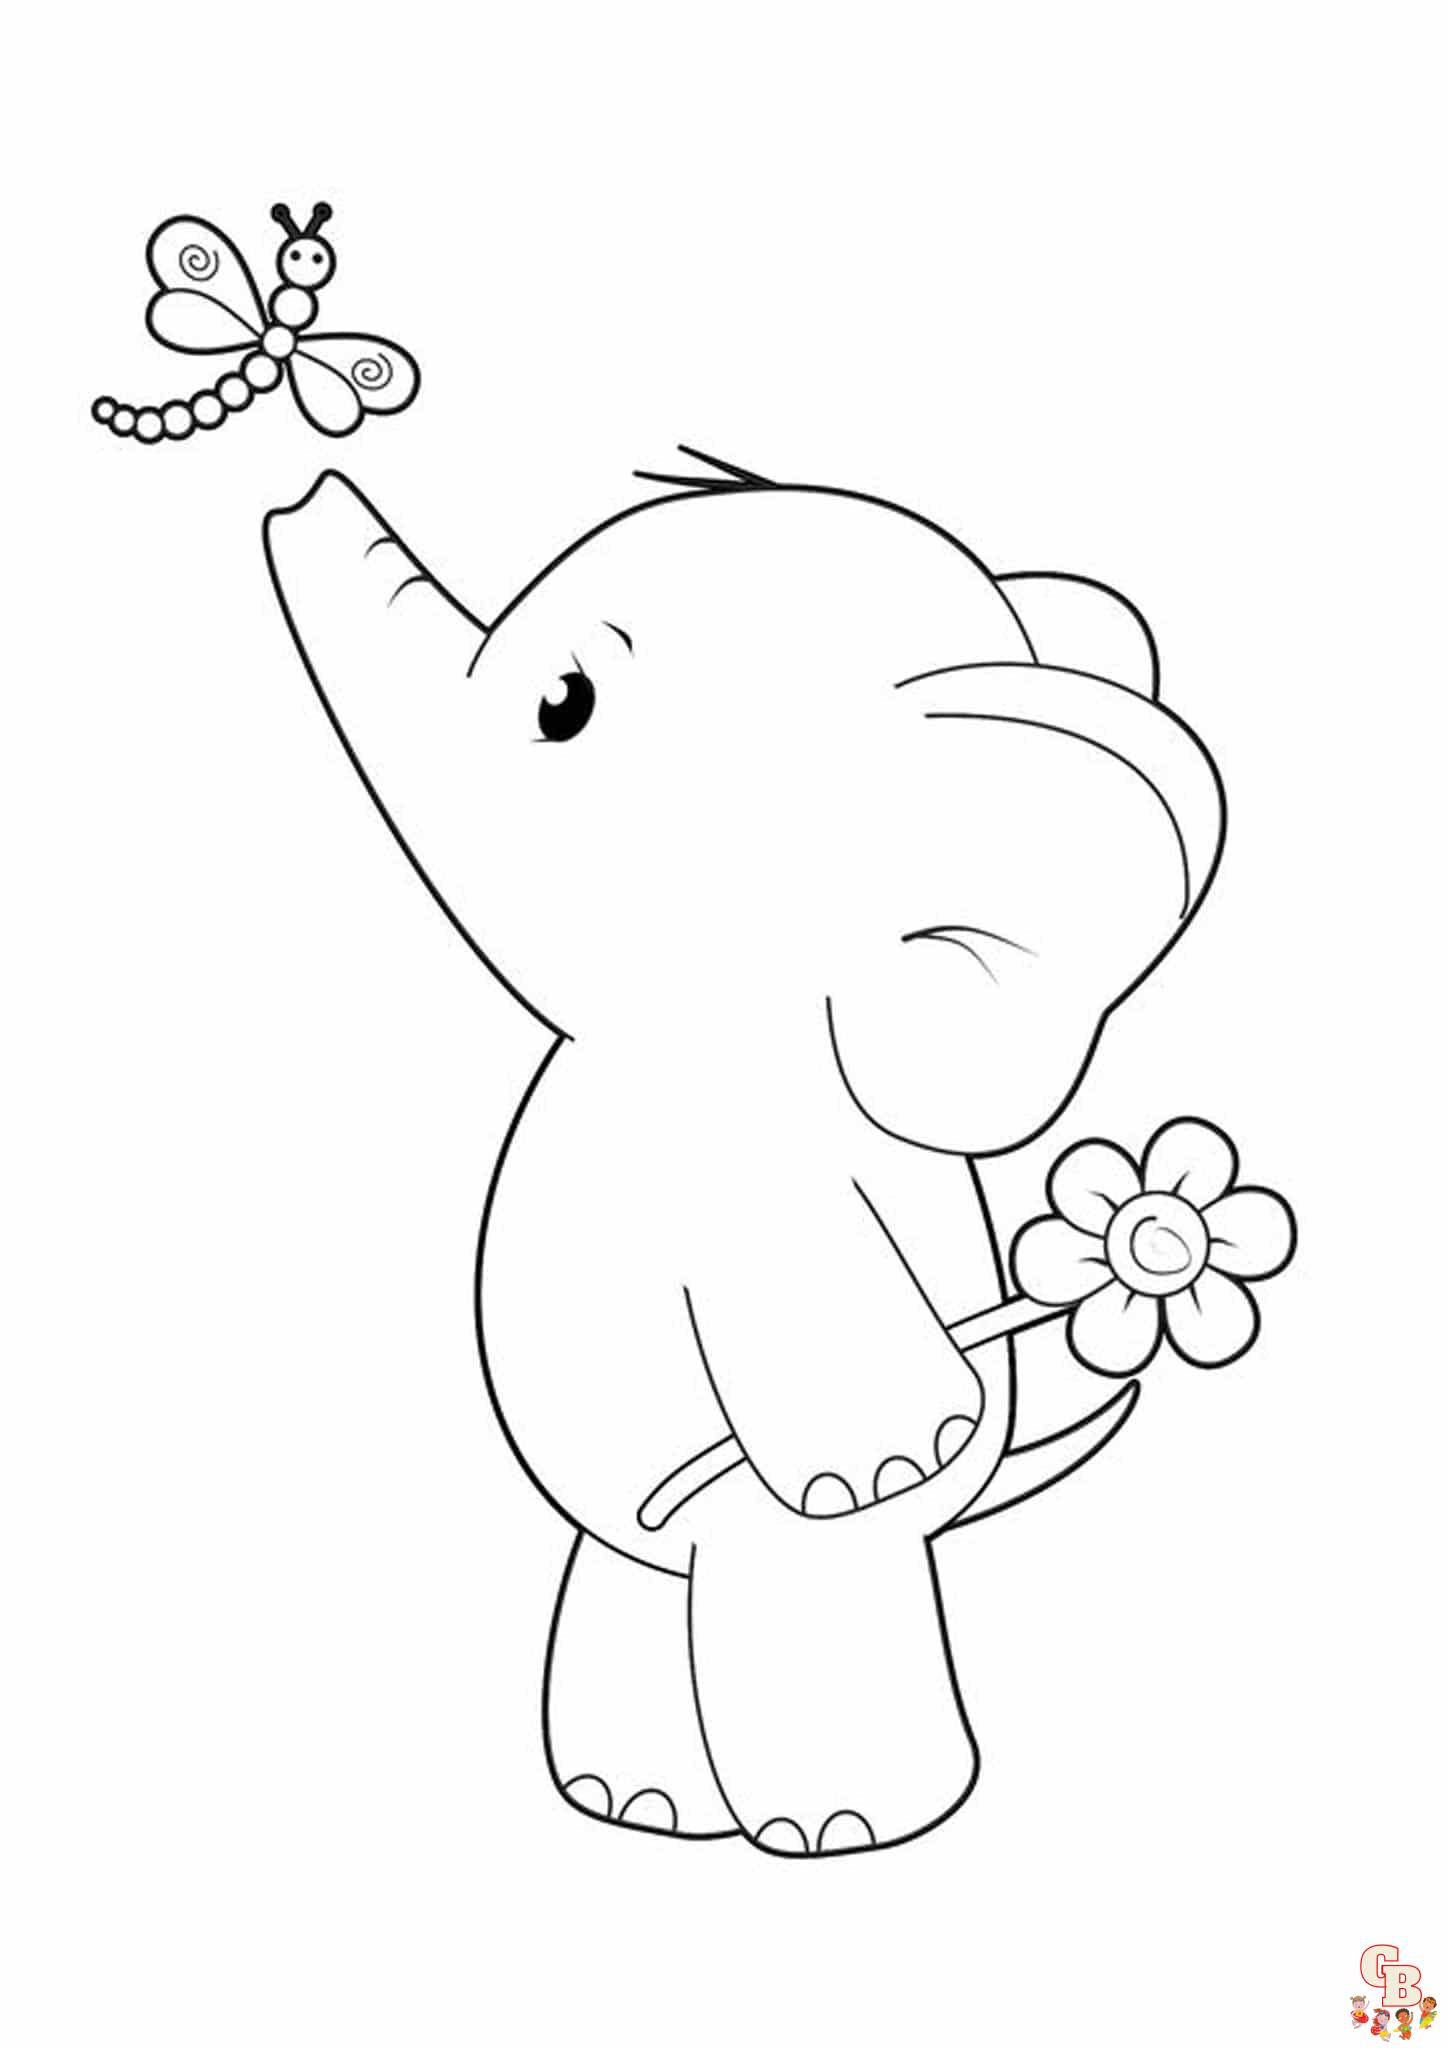 Cute Elephant Coloring Pages 3